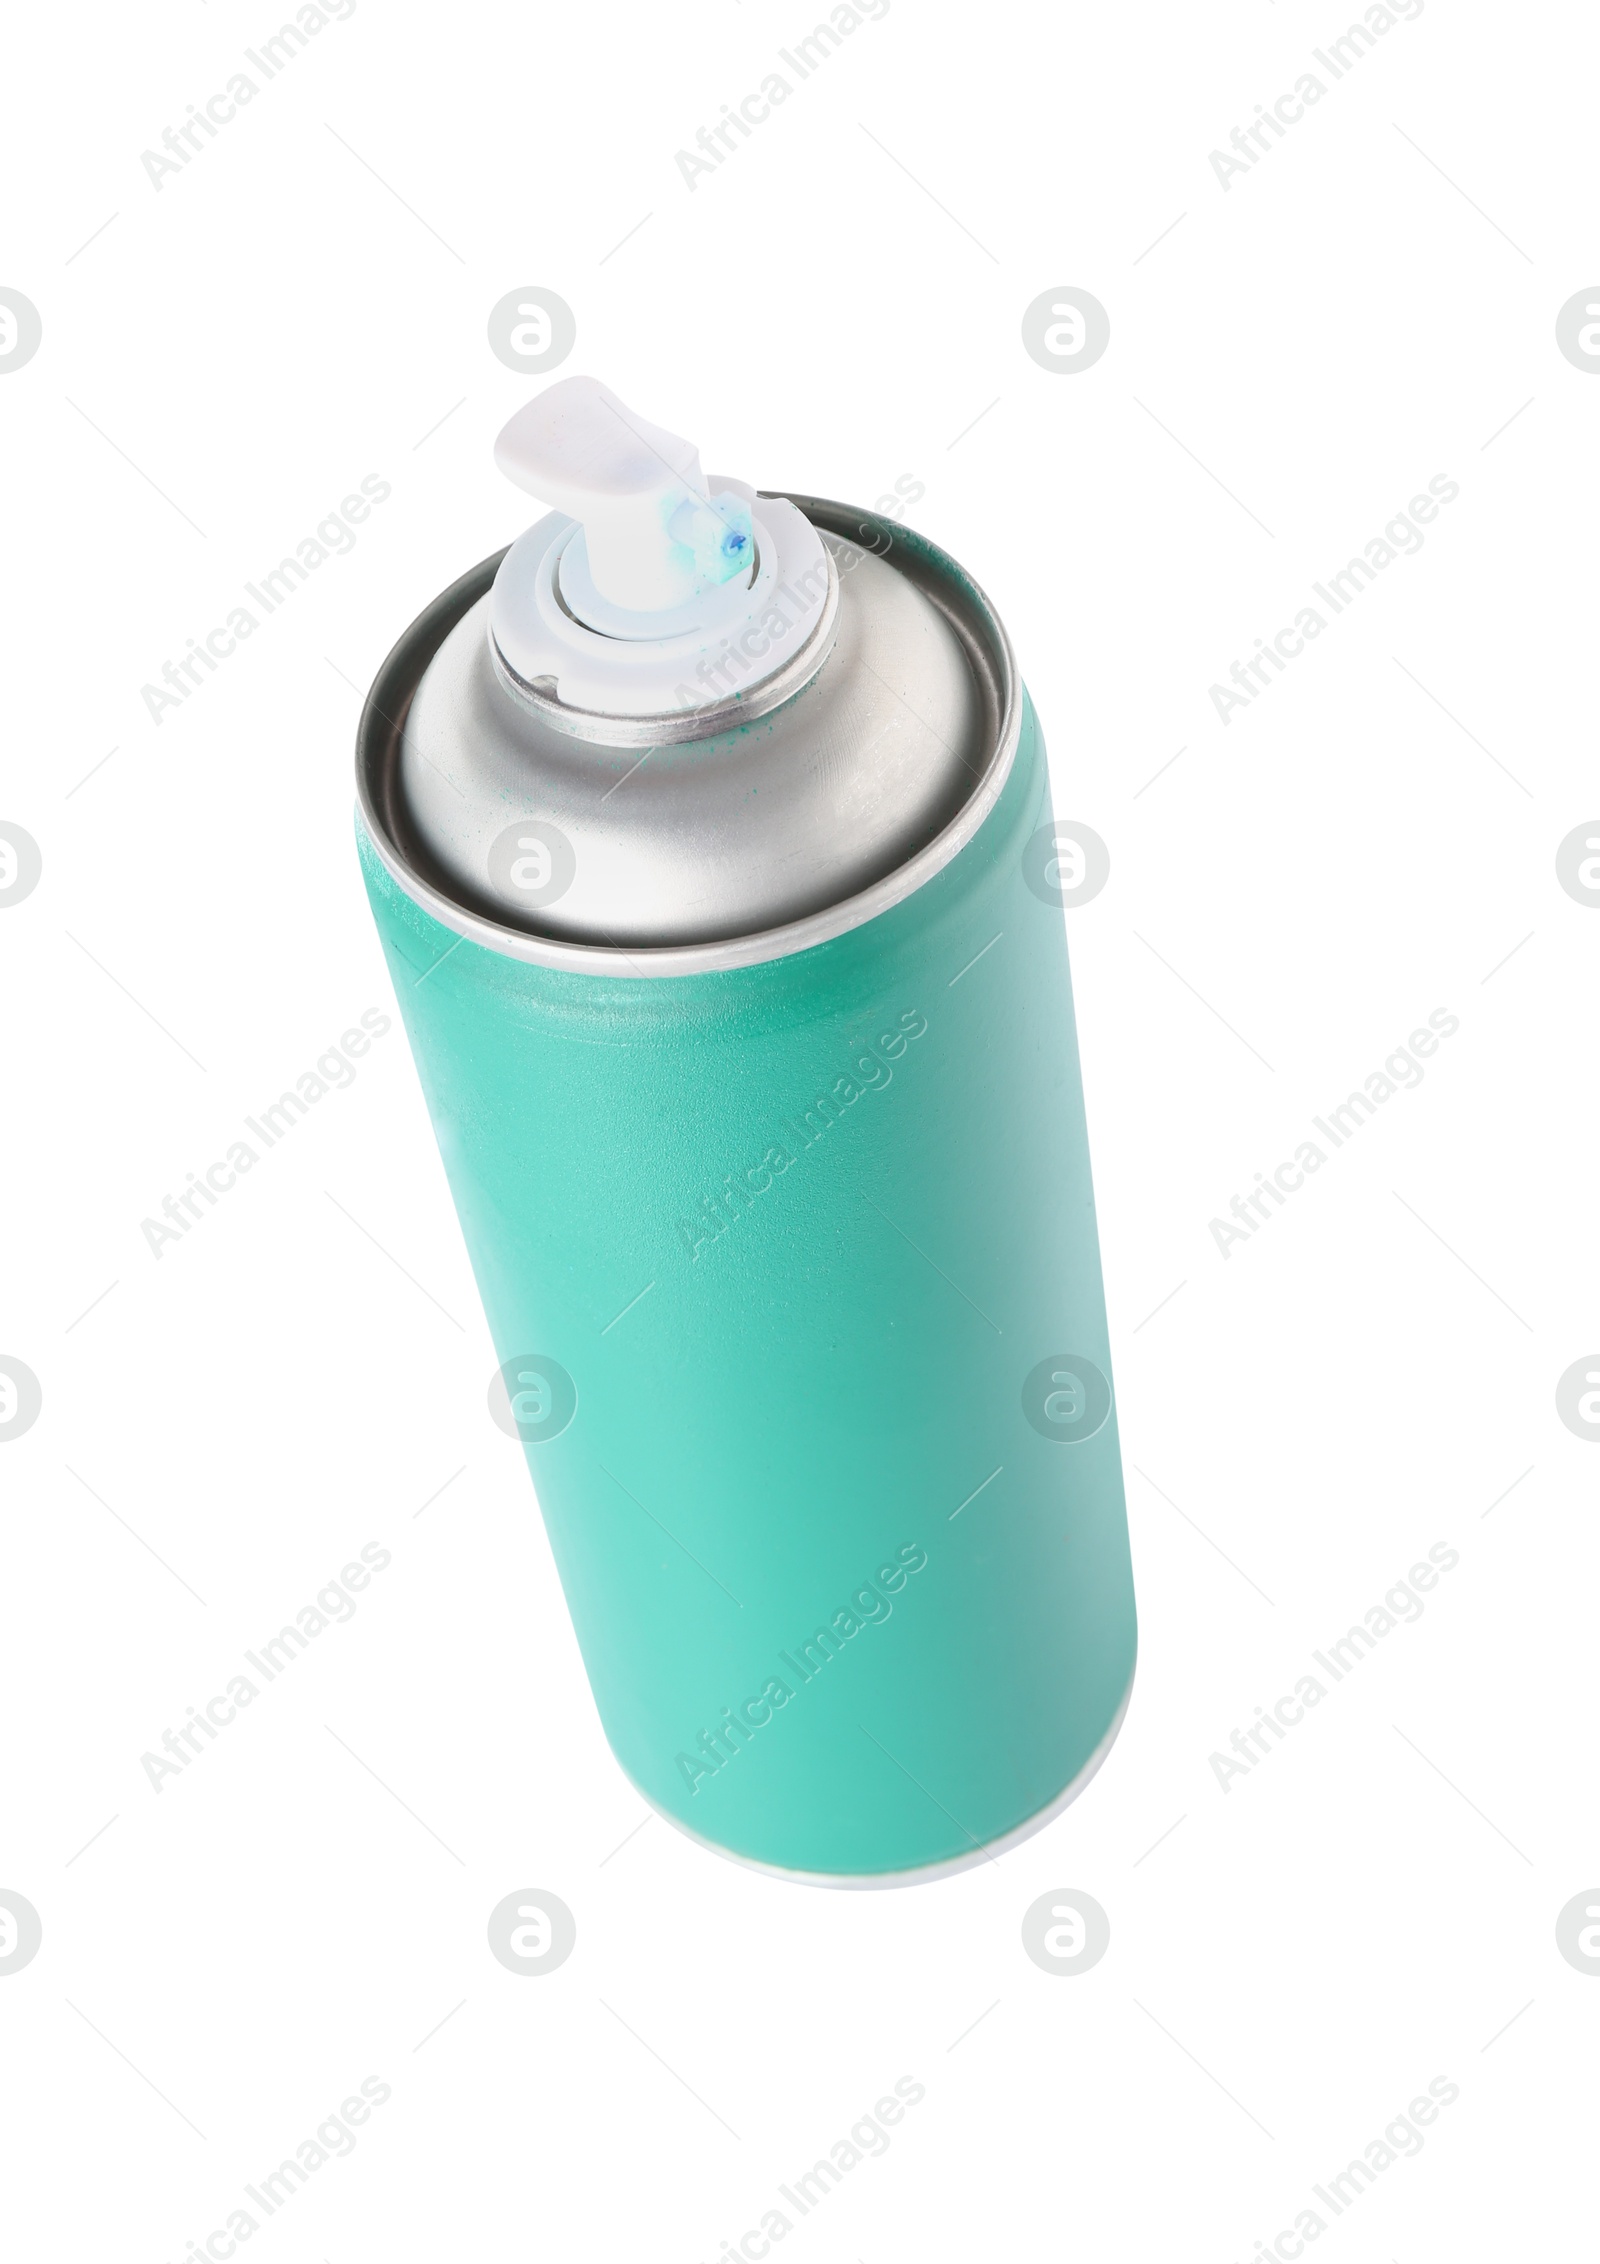 Photo of One green spray paint can isolated on white